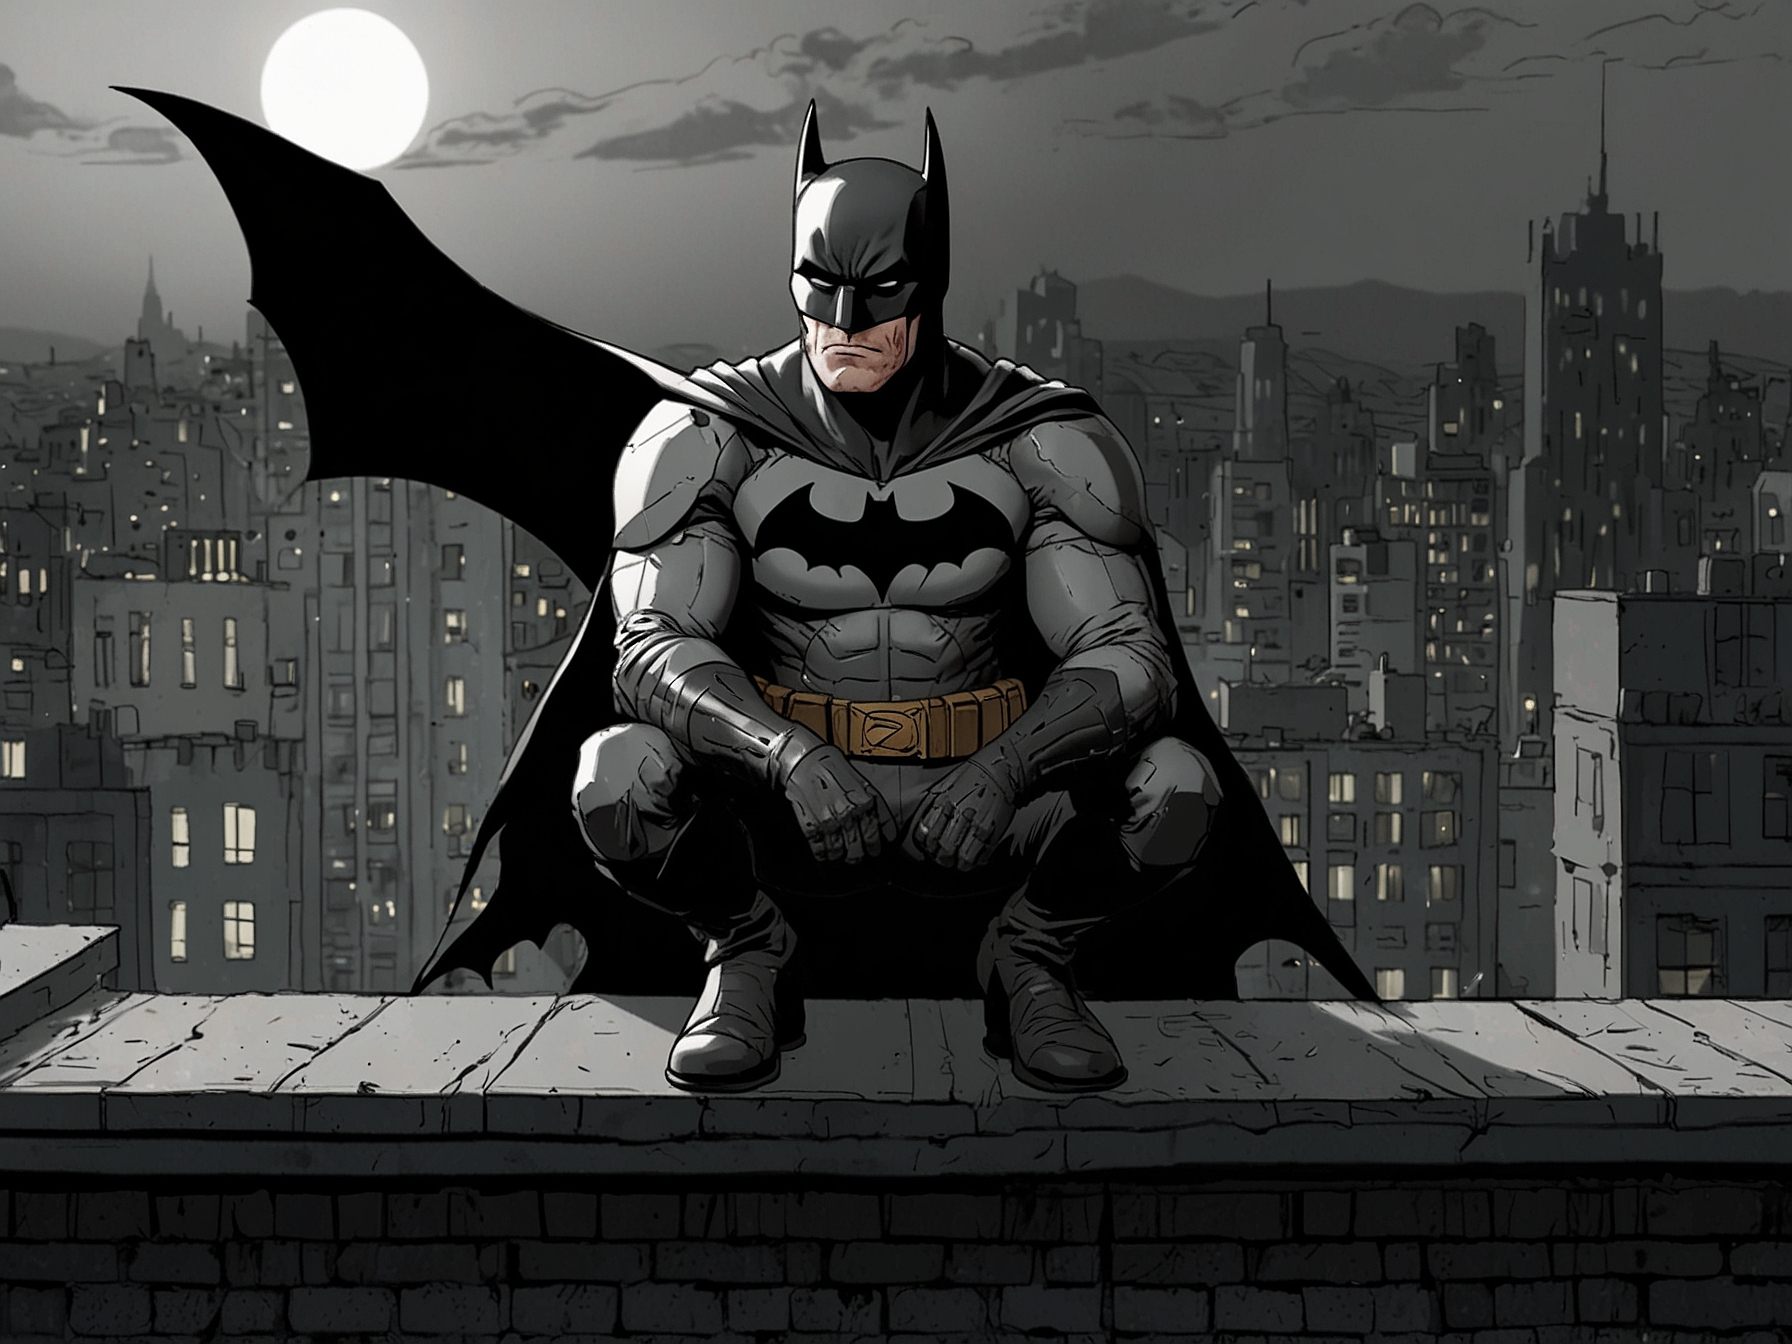 An animated scene featuring Batman, voiced by Hamish Linklater, brooding on a rooftop, showcasing the dark and complex character portrayal promised in the new series.